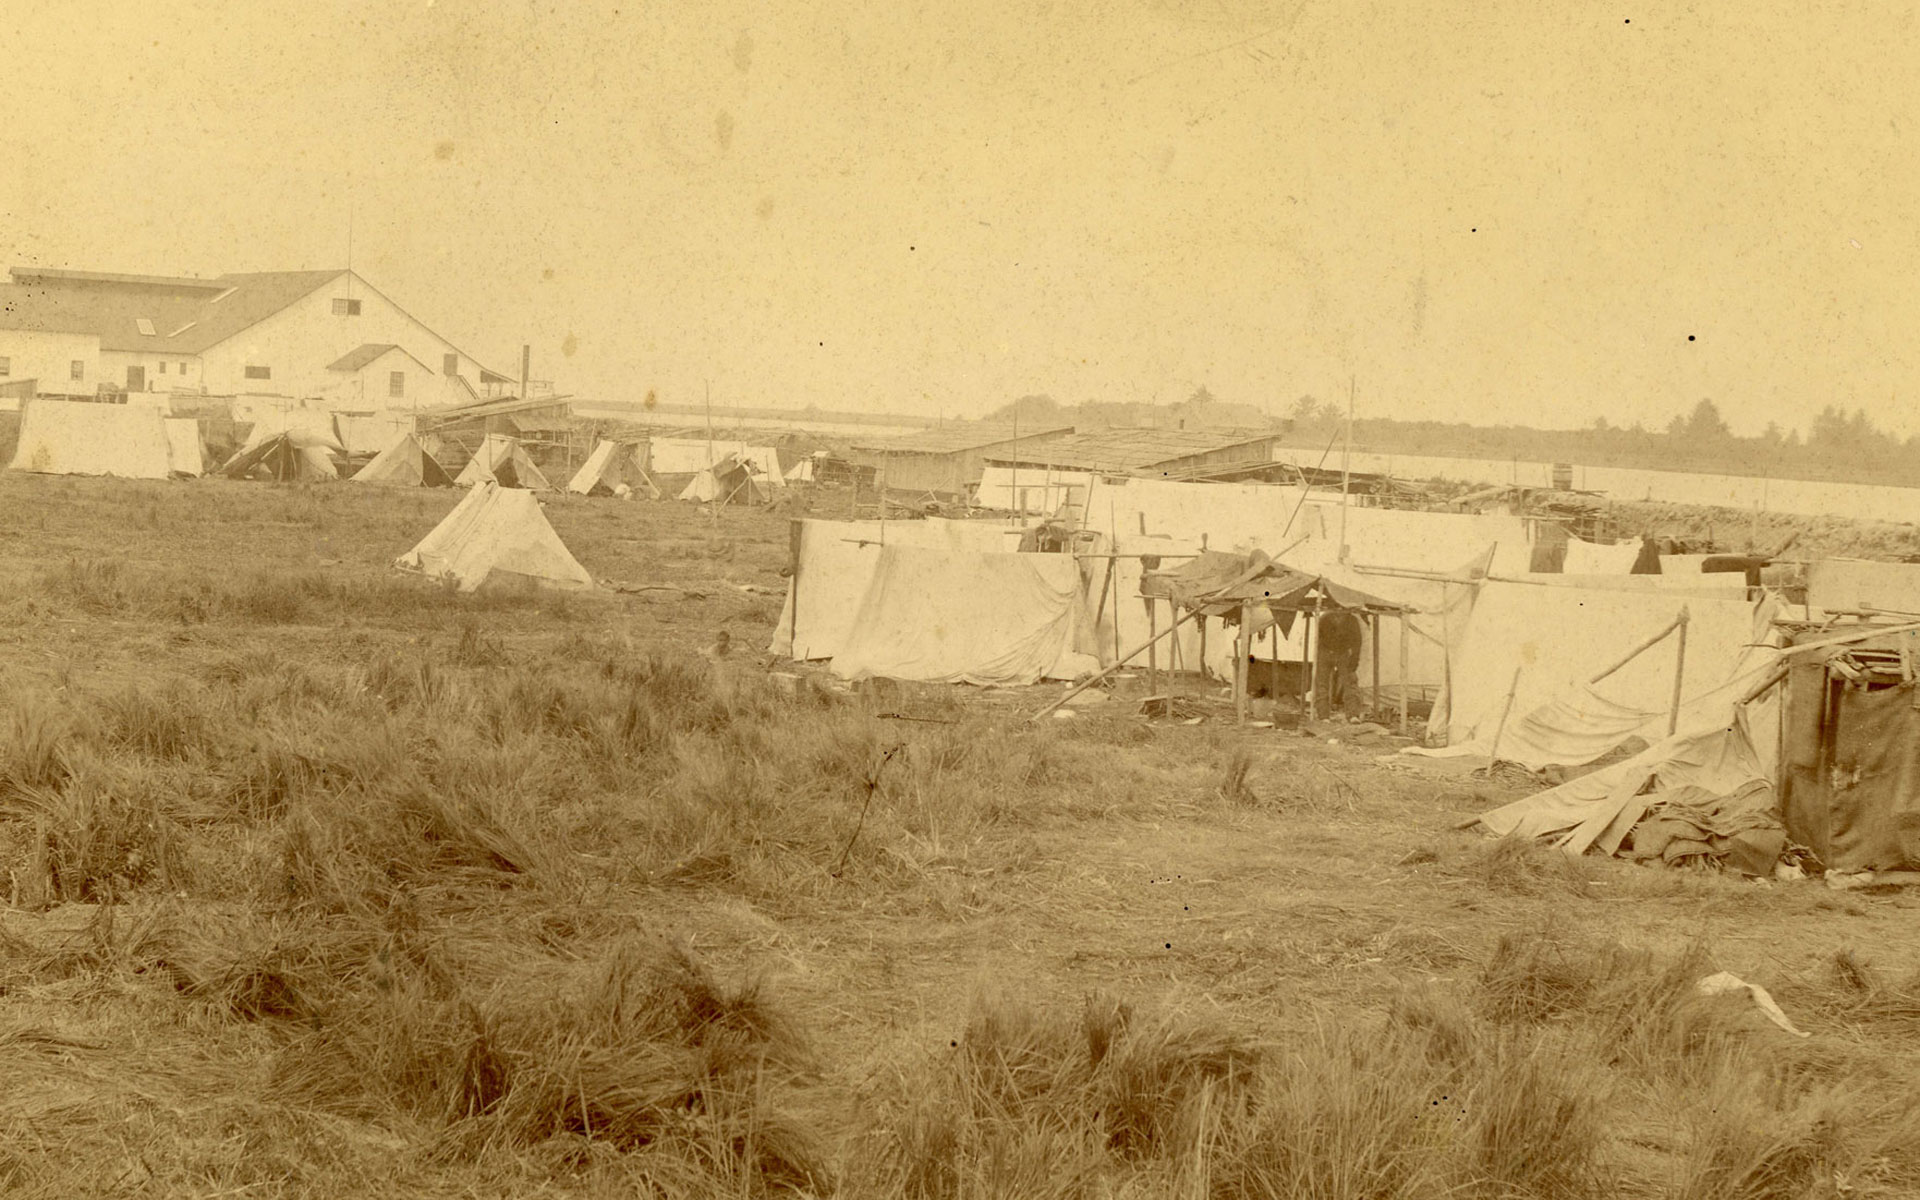 Grouping of tents on a grassy field with a cannery building in the background.